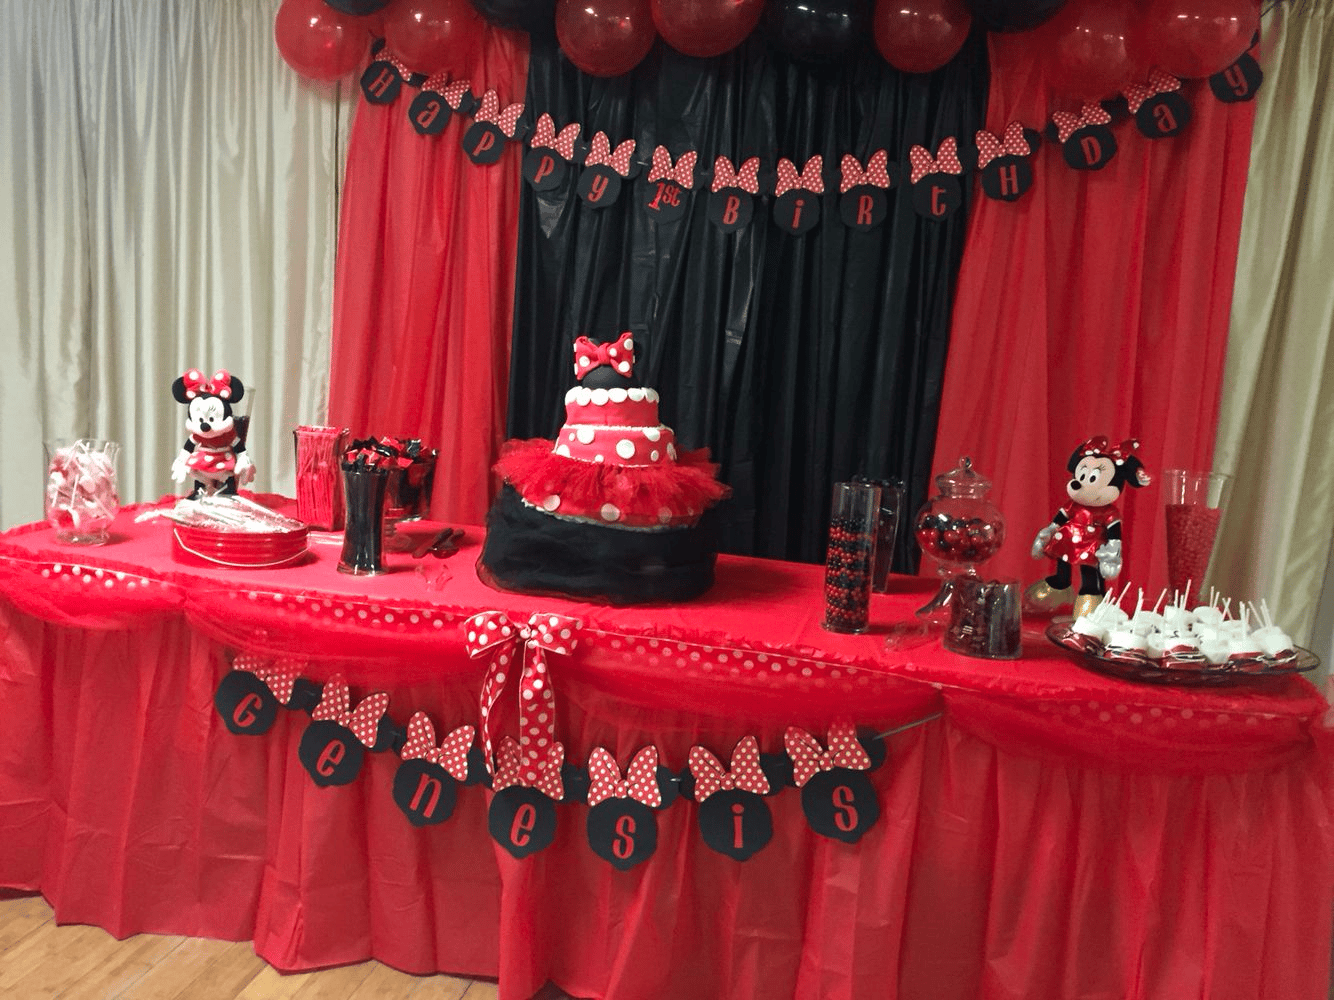 Minnie-mouse-themed party decor in pink, red, and black